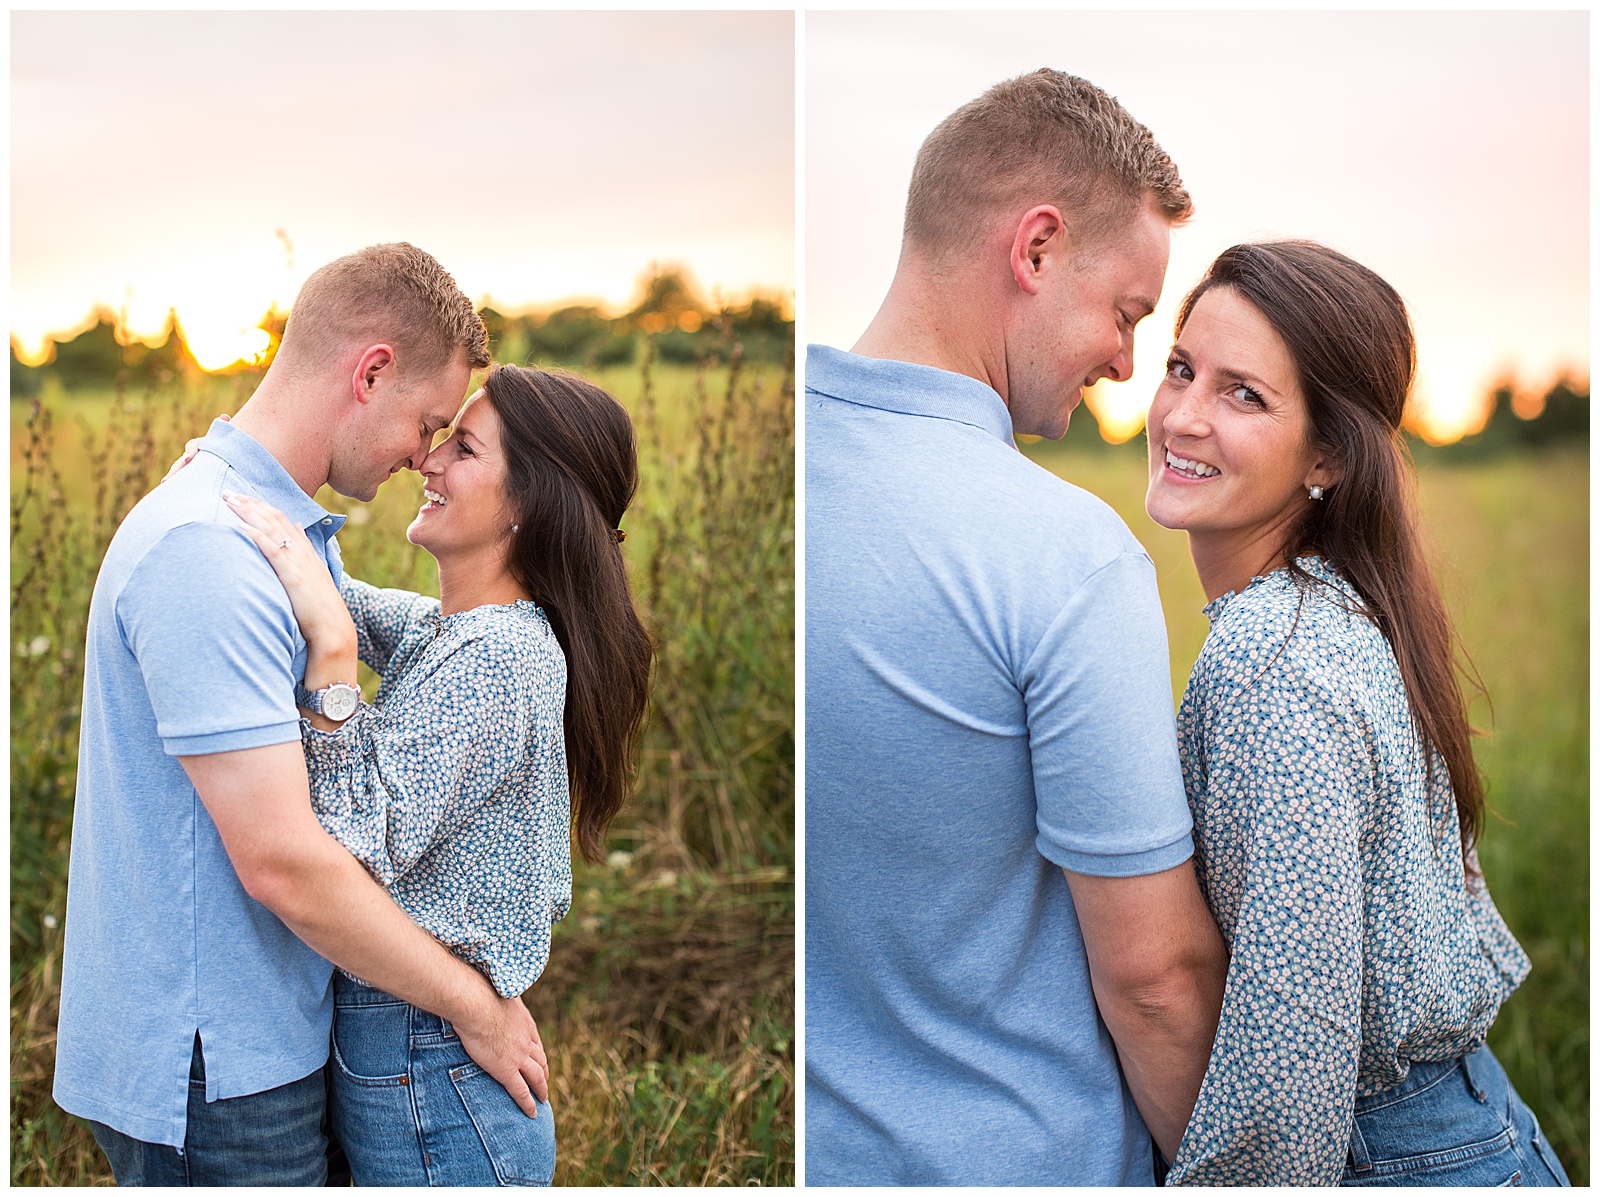 golden hour engagement photo session in a field